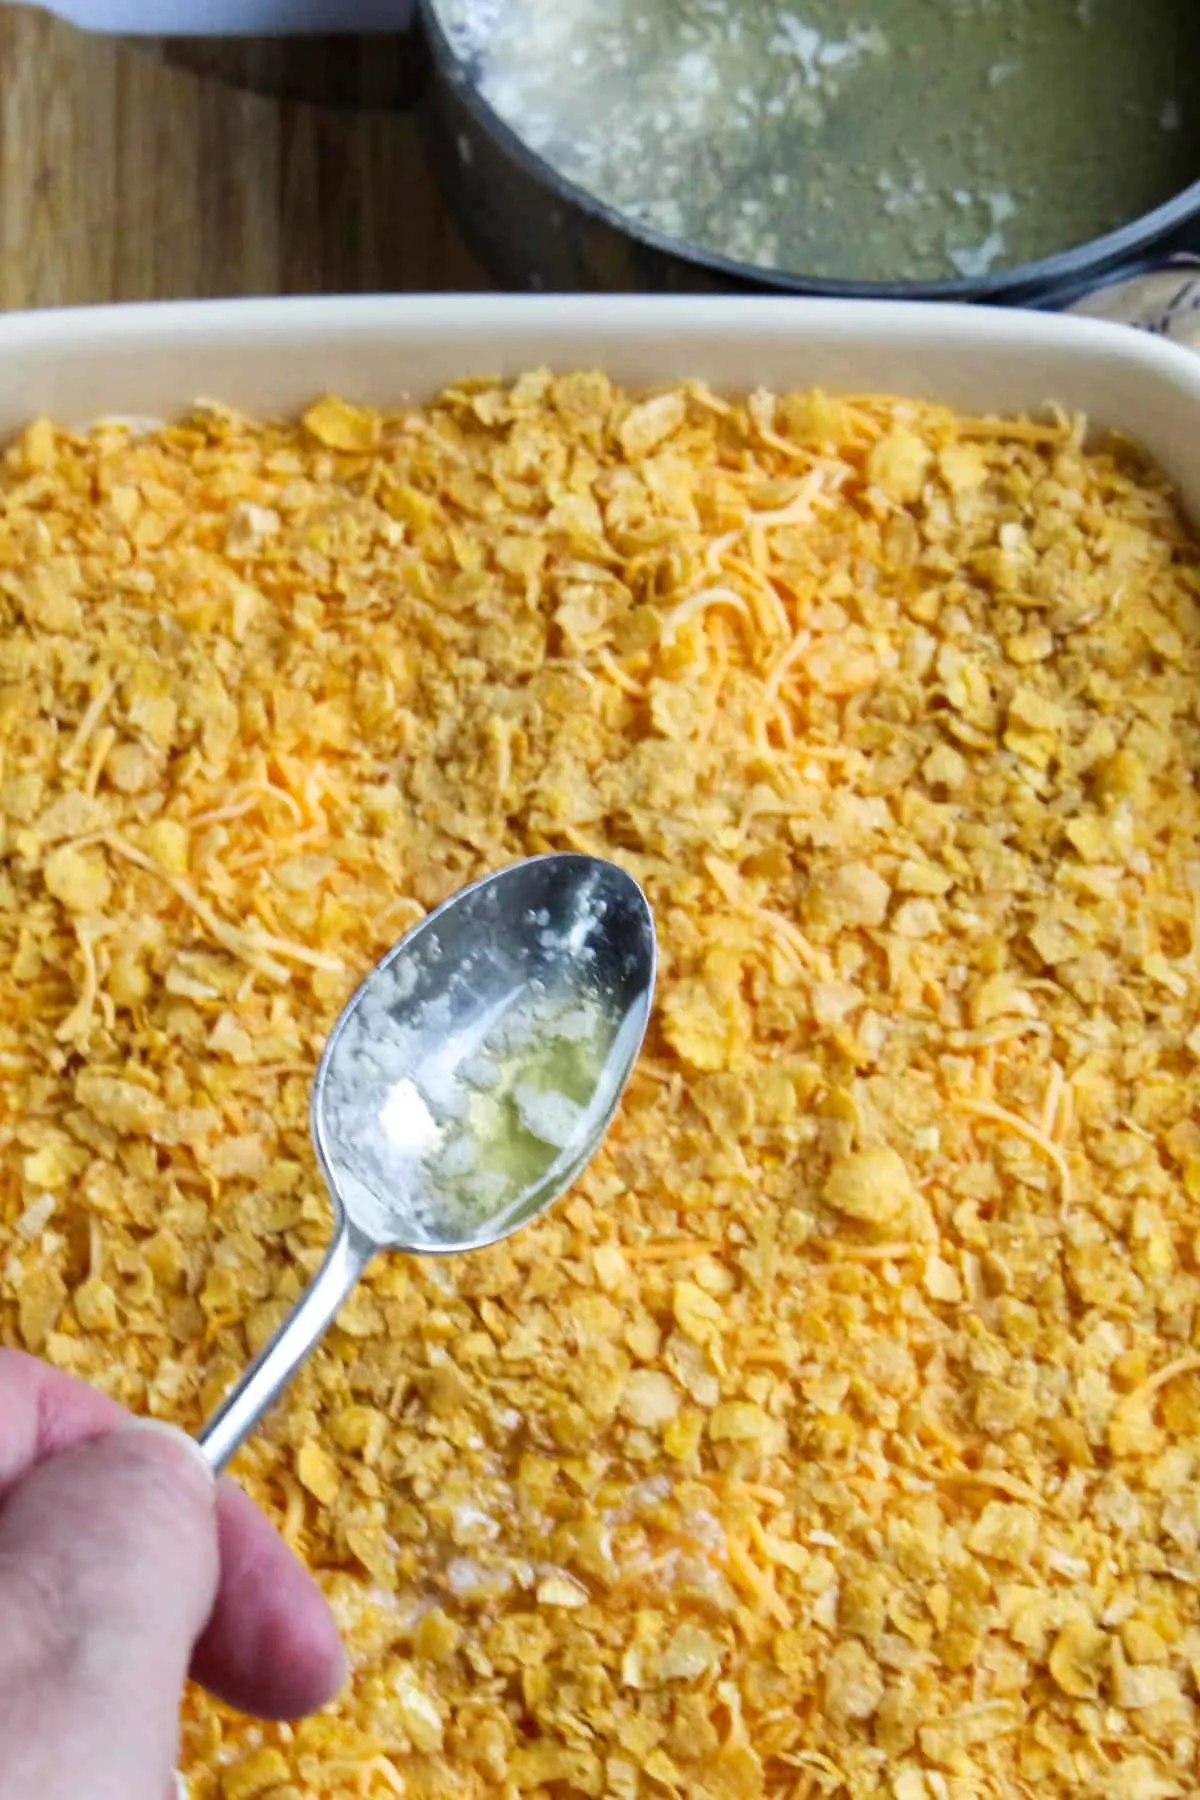 Finishing cheesy potato casserole with corn flakes and drizzling with melted butter over top with spoon.